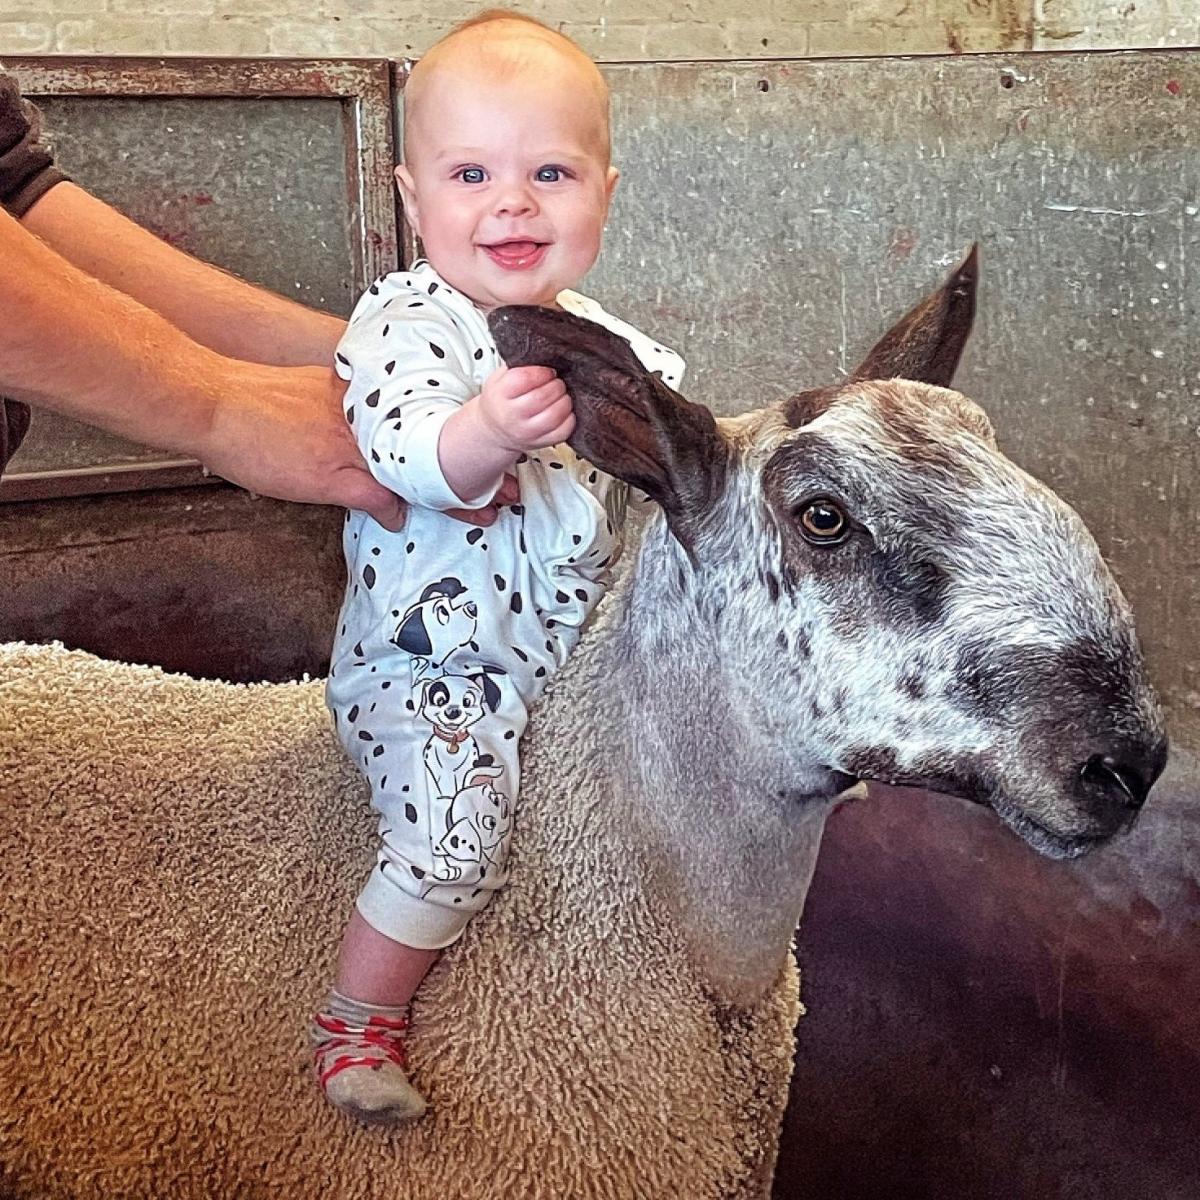 Eilidh Duncan - Giddy-up! It’s off to the market we go, we’ve tups to sell